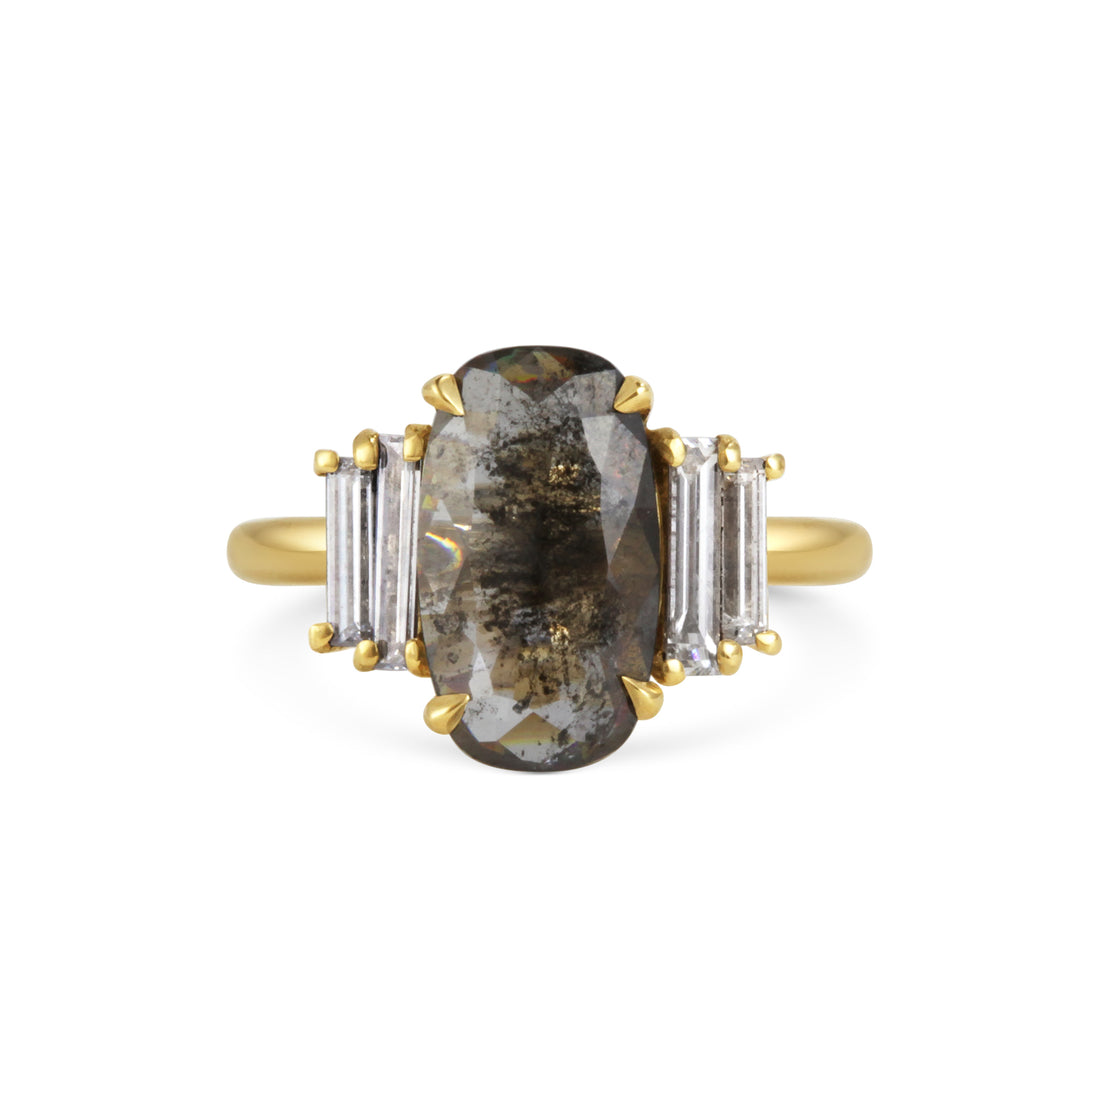  Large Stormy Grey Diamond Ring by Michelle Oh | The Cut London